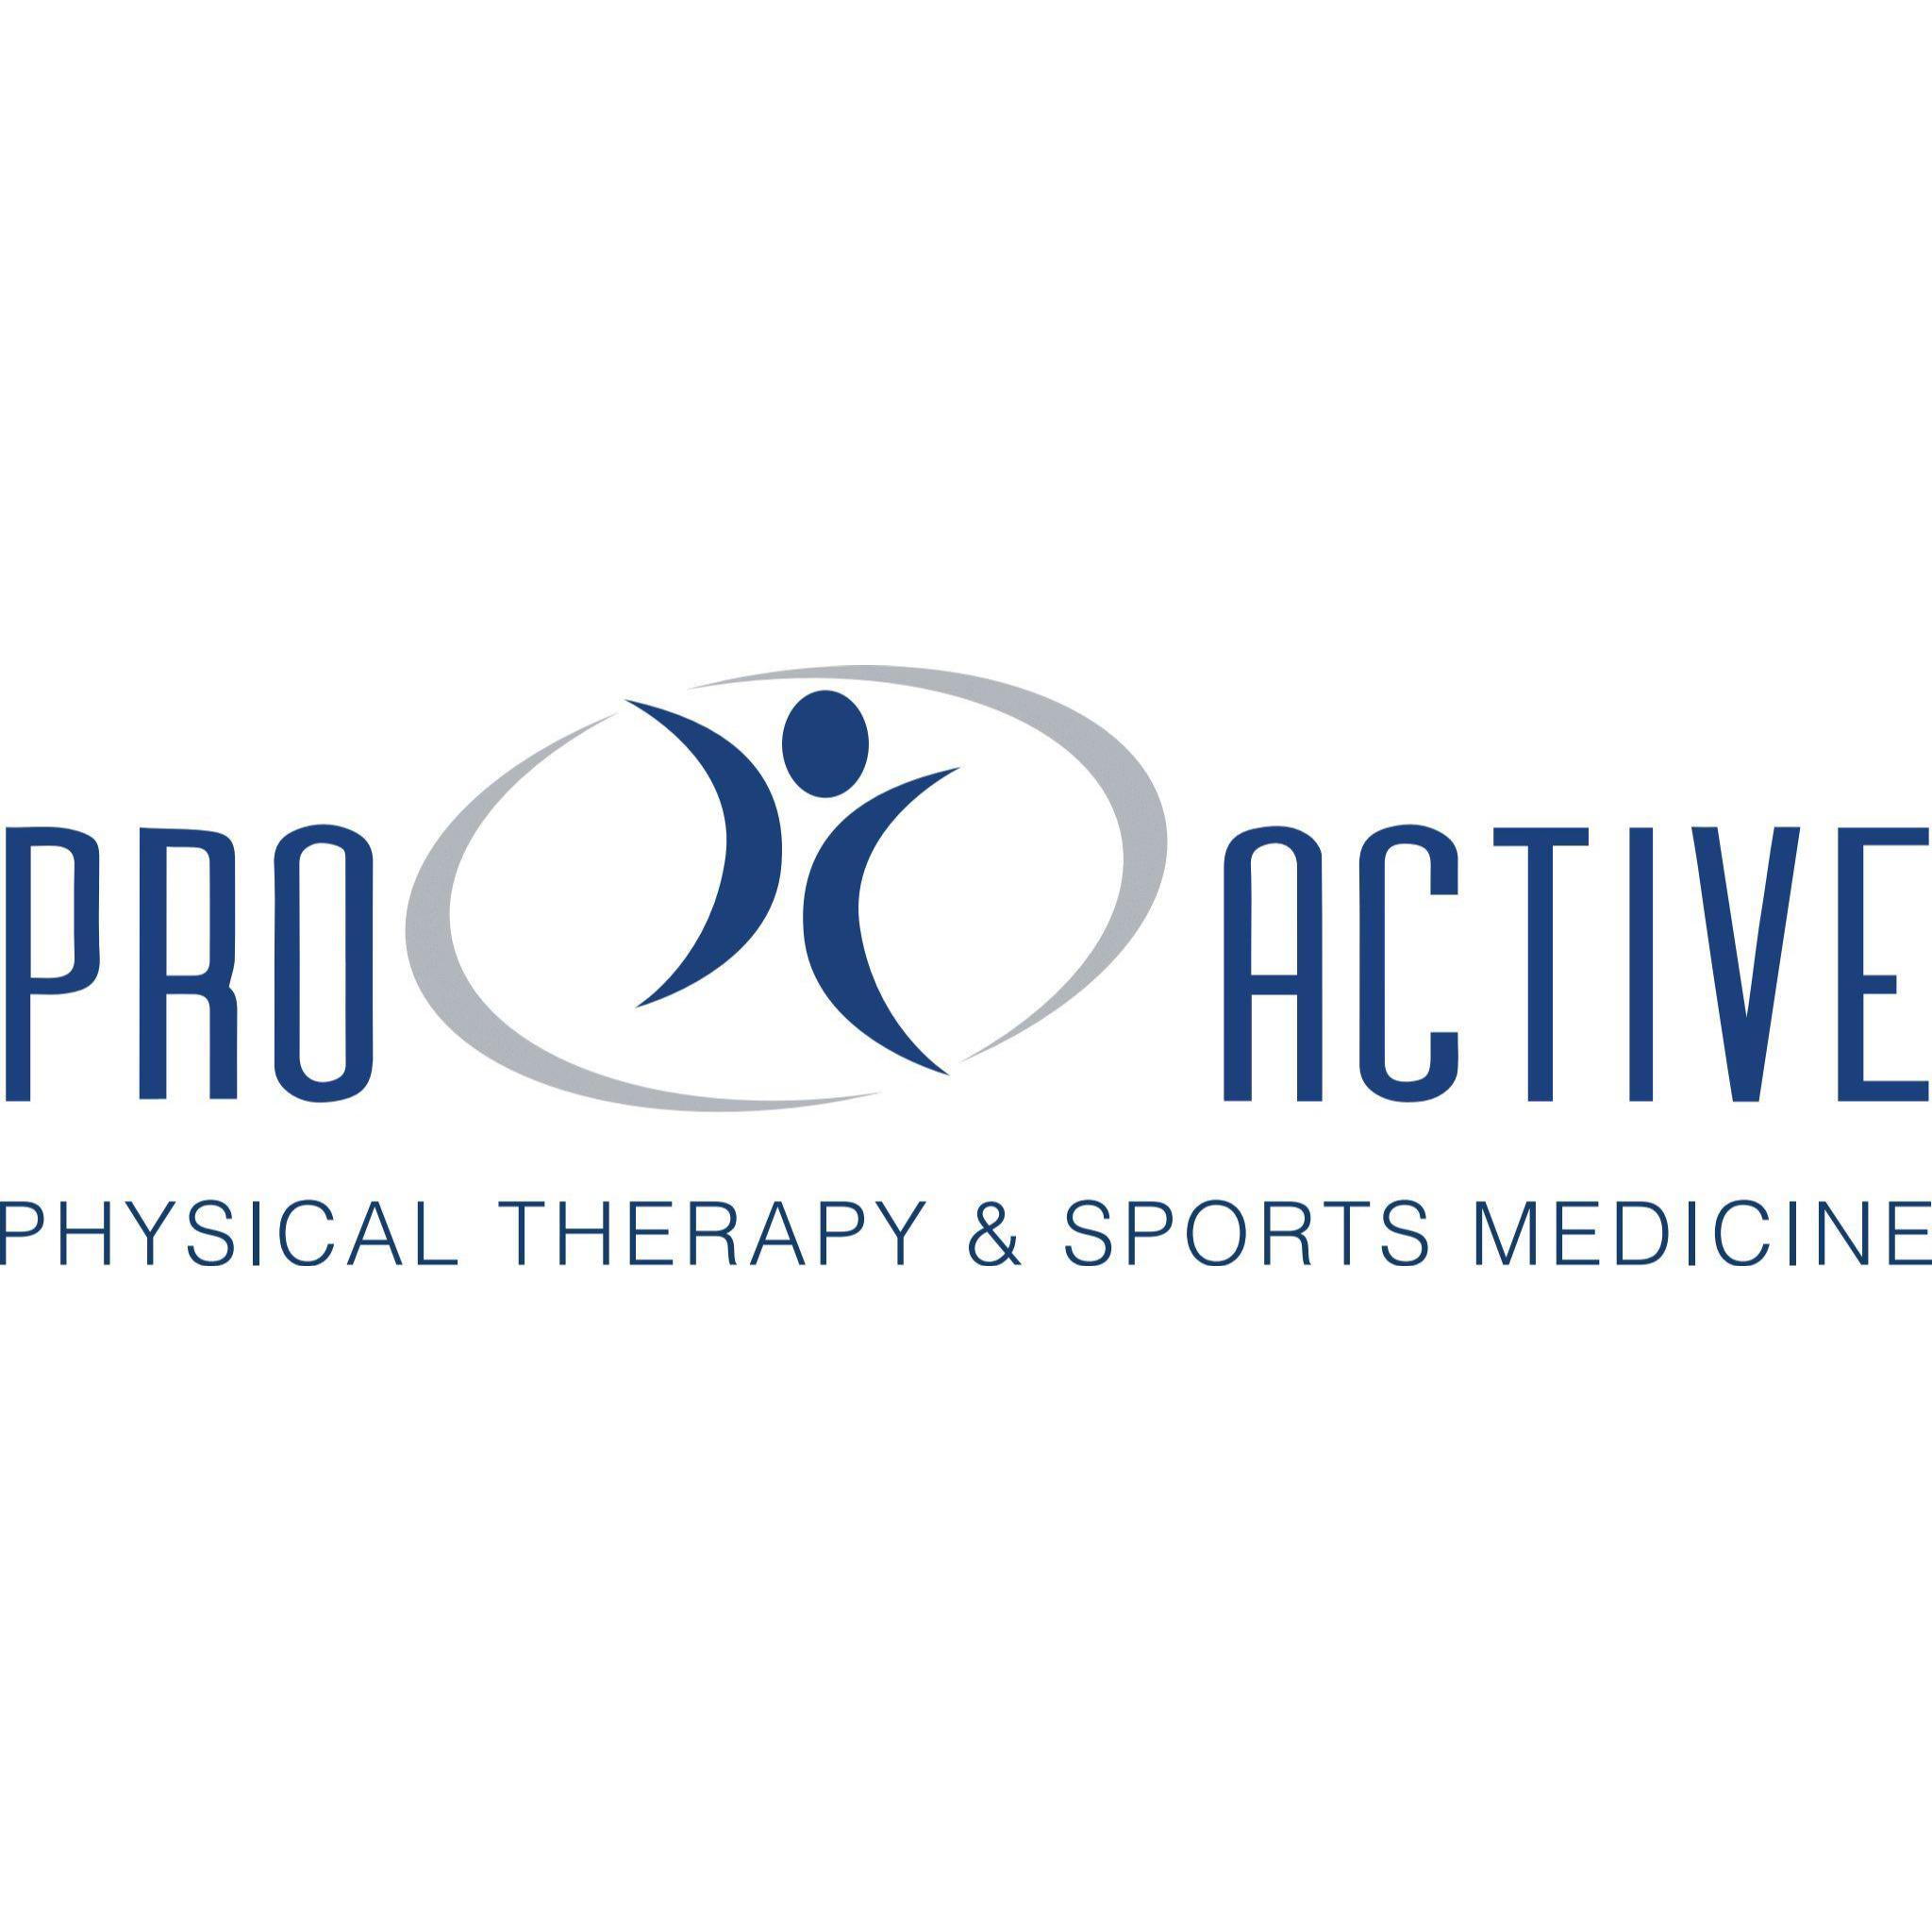 Pro Active Physical Therapy and Sports Medicine - Eaton - Eaton, CO 80615 - (970)454-2560 | ShowMeLocal.com